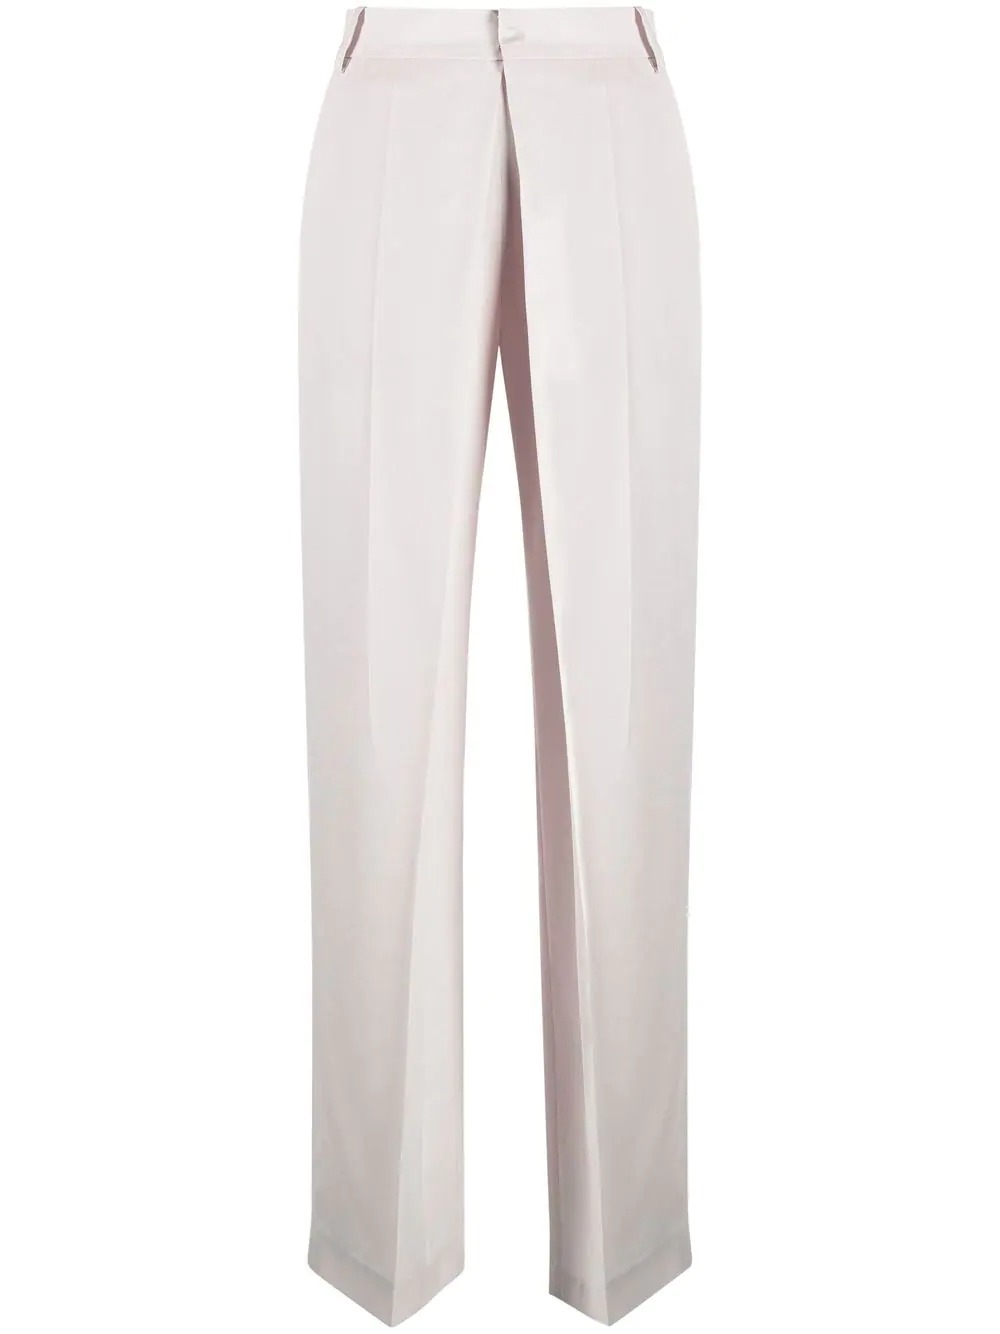 Missguided  Tall High Waisted Tailored Wide Leg Trousers  Rust   Missguided